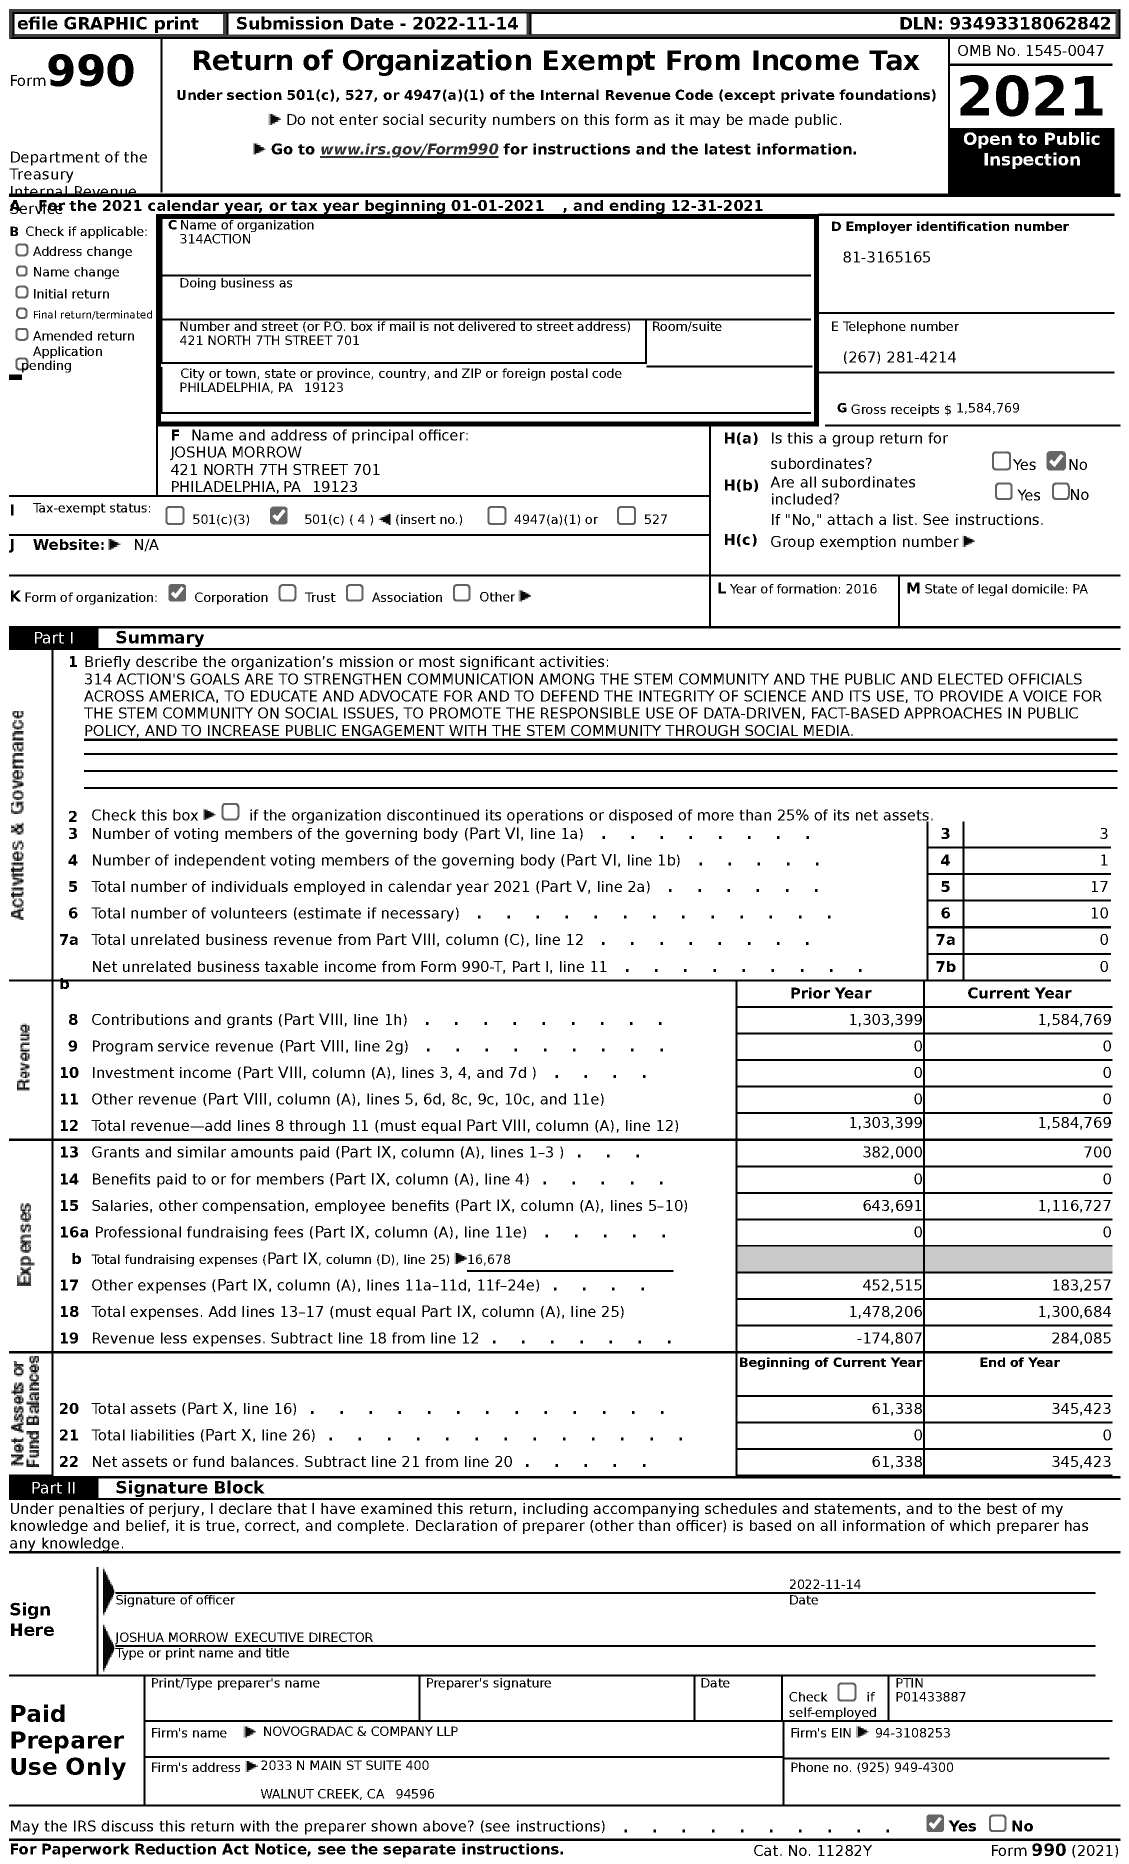 Image of first page of 2021 Form 990 for 314action